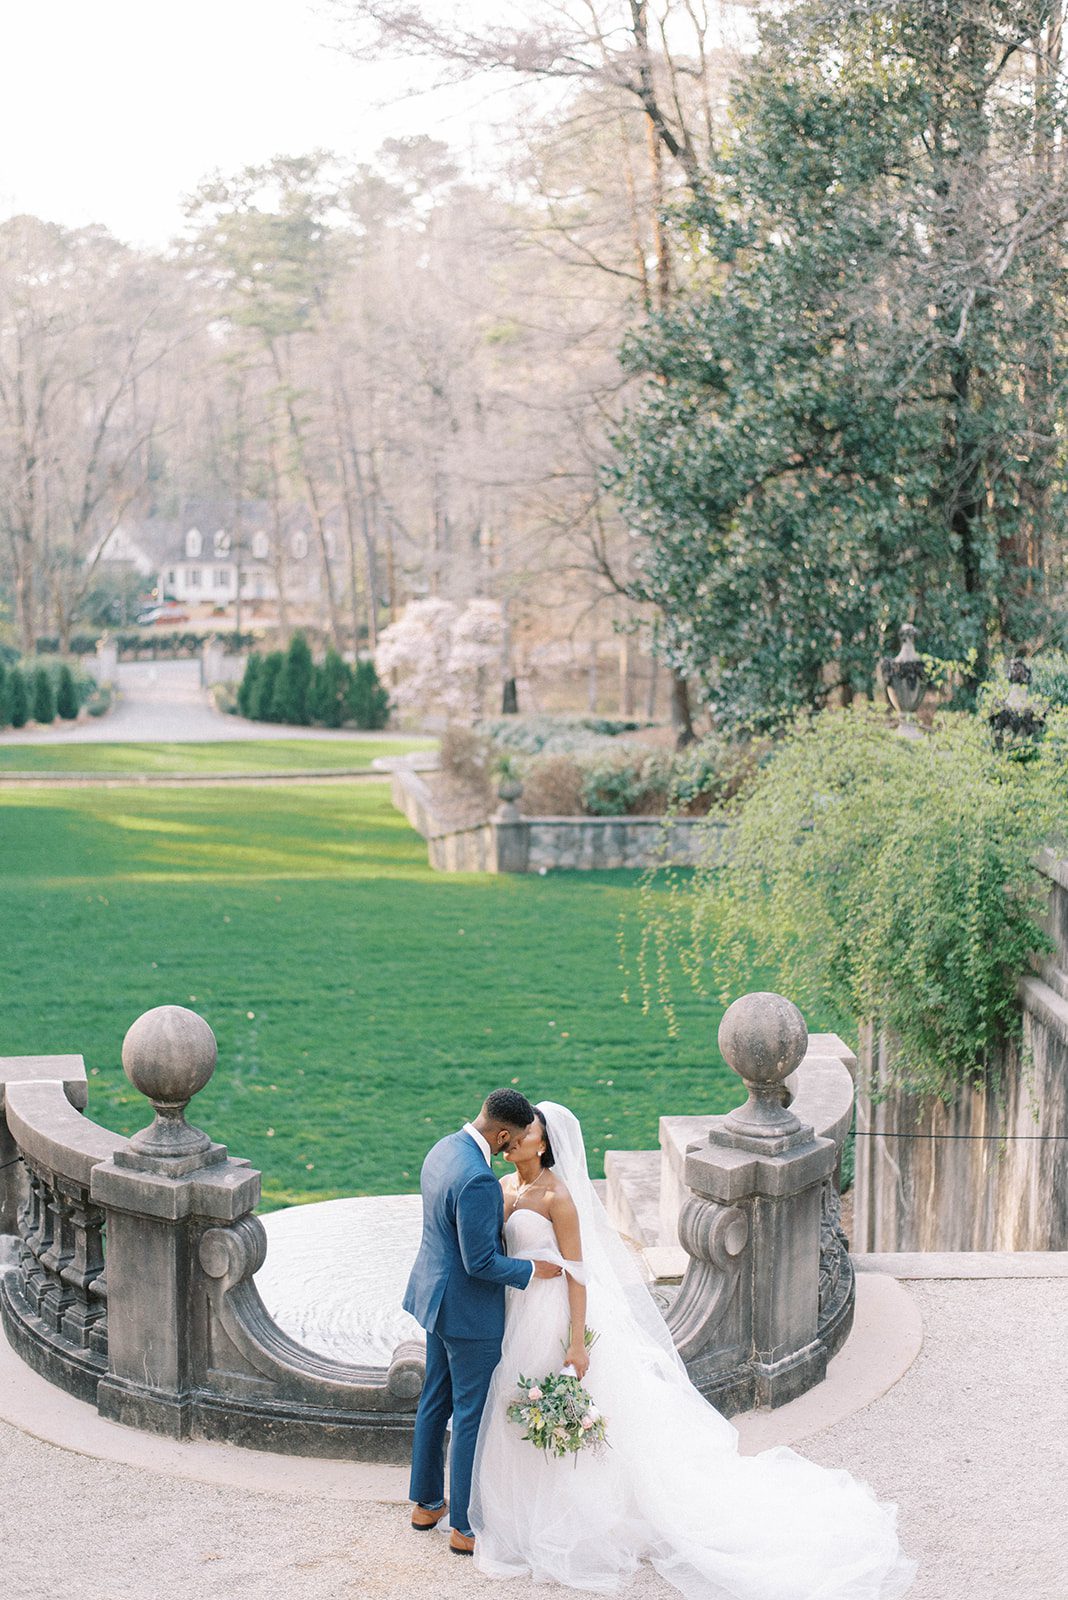 bride and groom standing on a lower balcony of a palace styled mansion that looks over a green garden as they kiss each other of their destination wedding day Swan House Atlanta Wedding